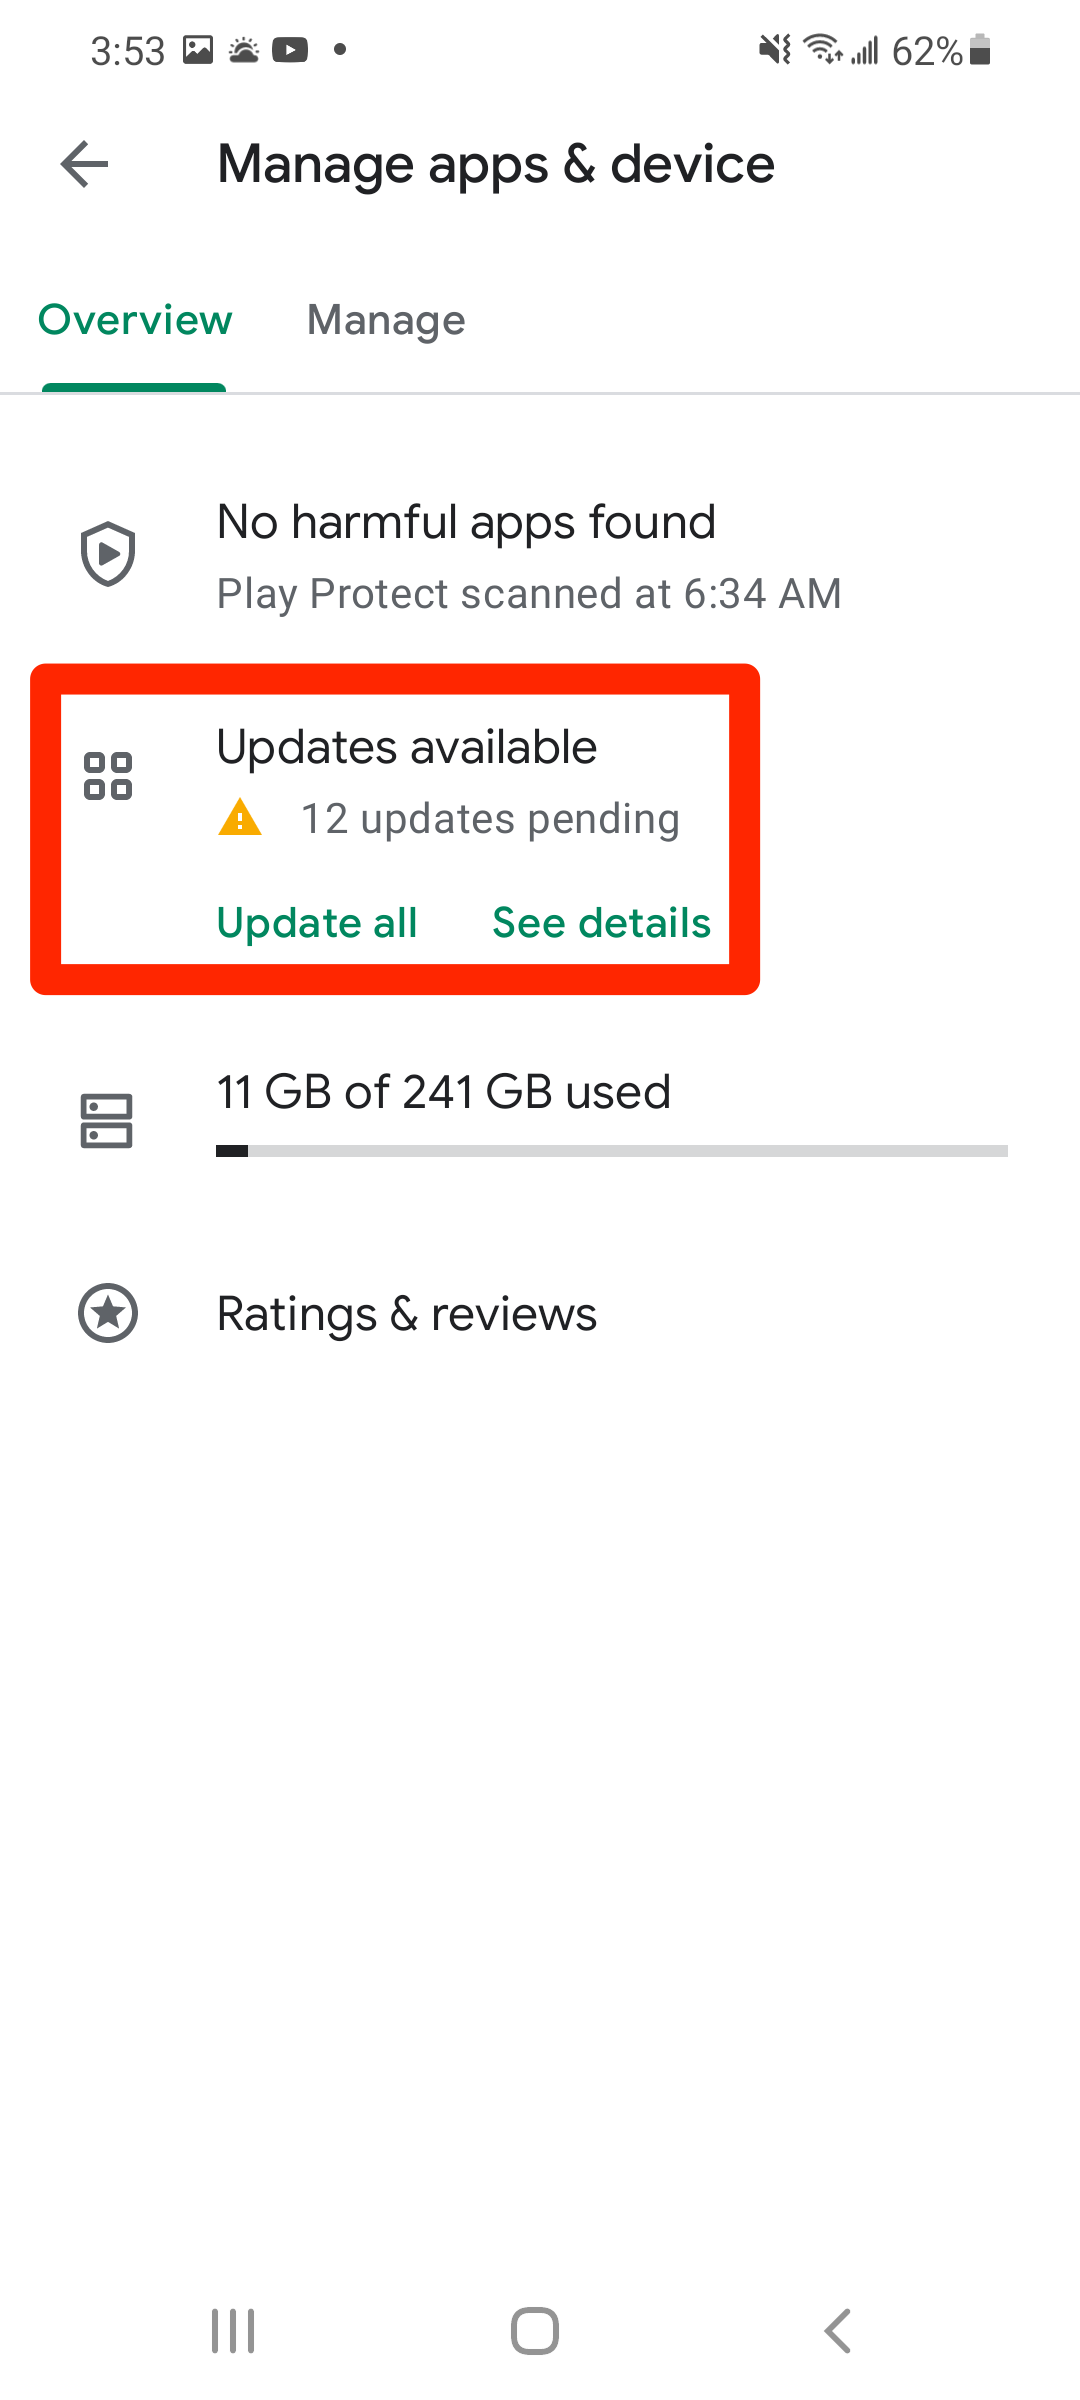 The Google Play Store's "Manage apps & device" page, with the "Update available" option highlighted.